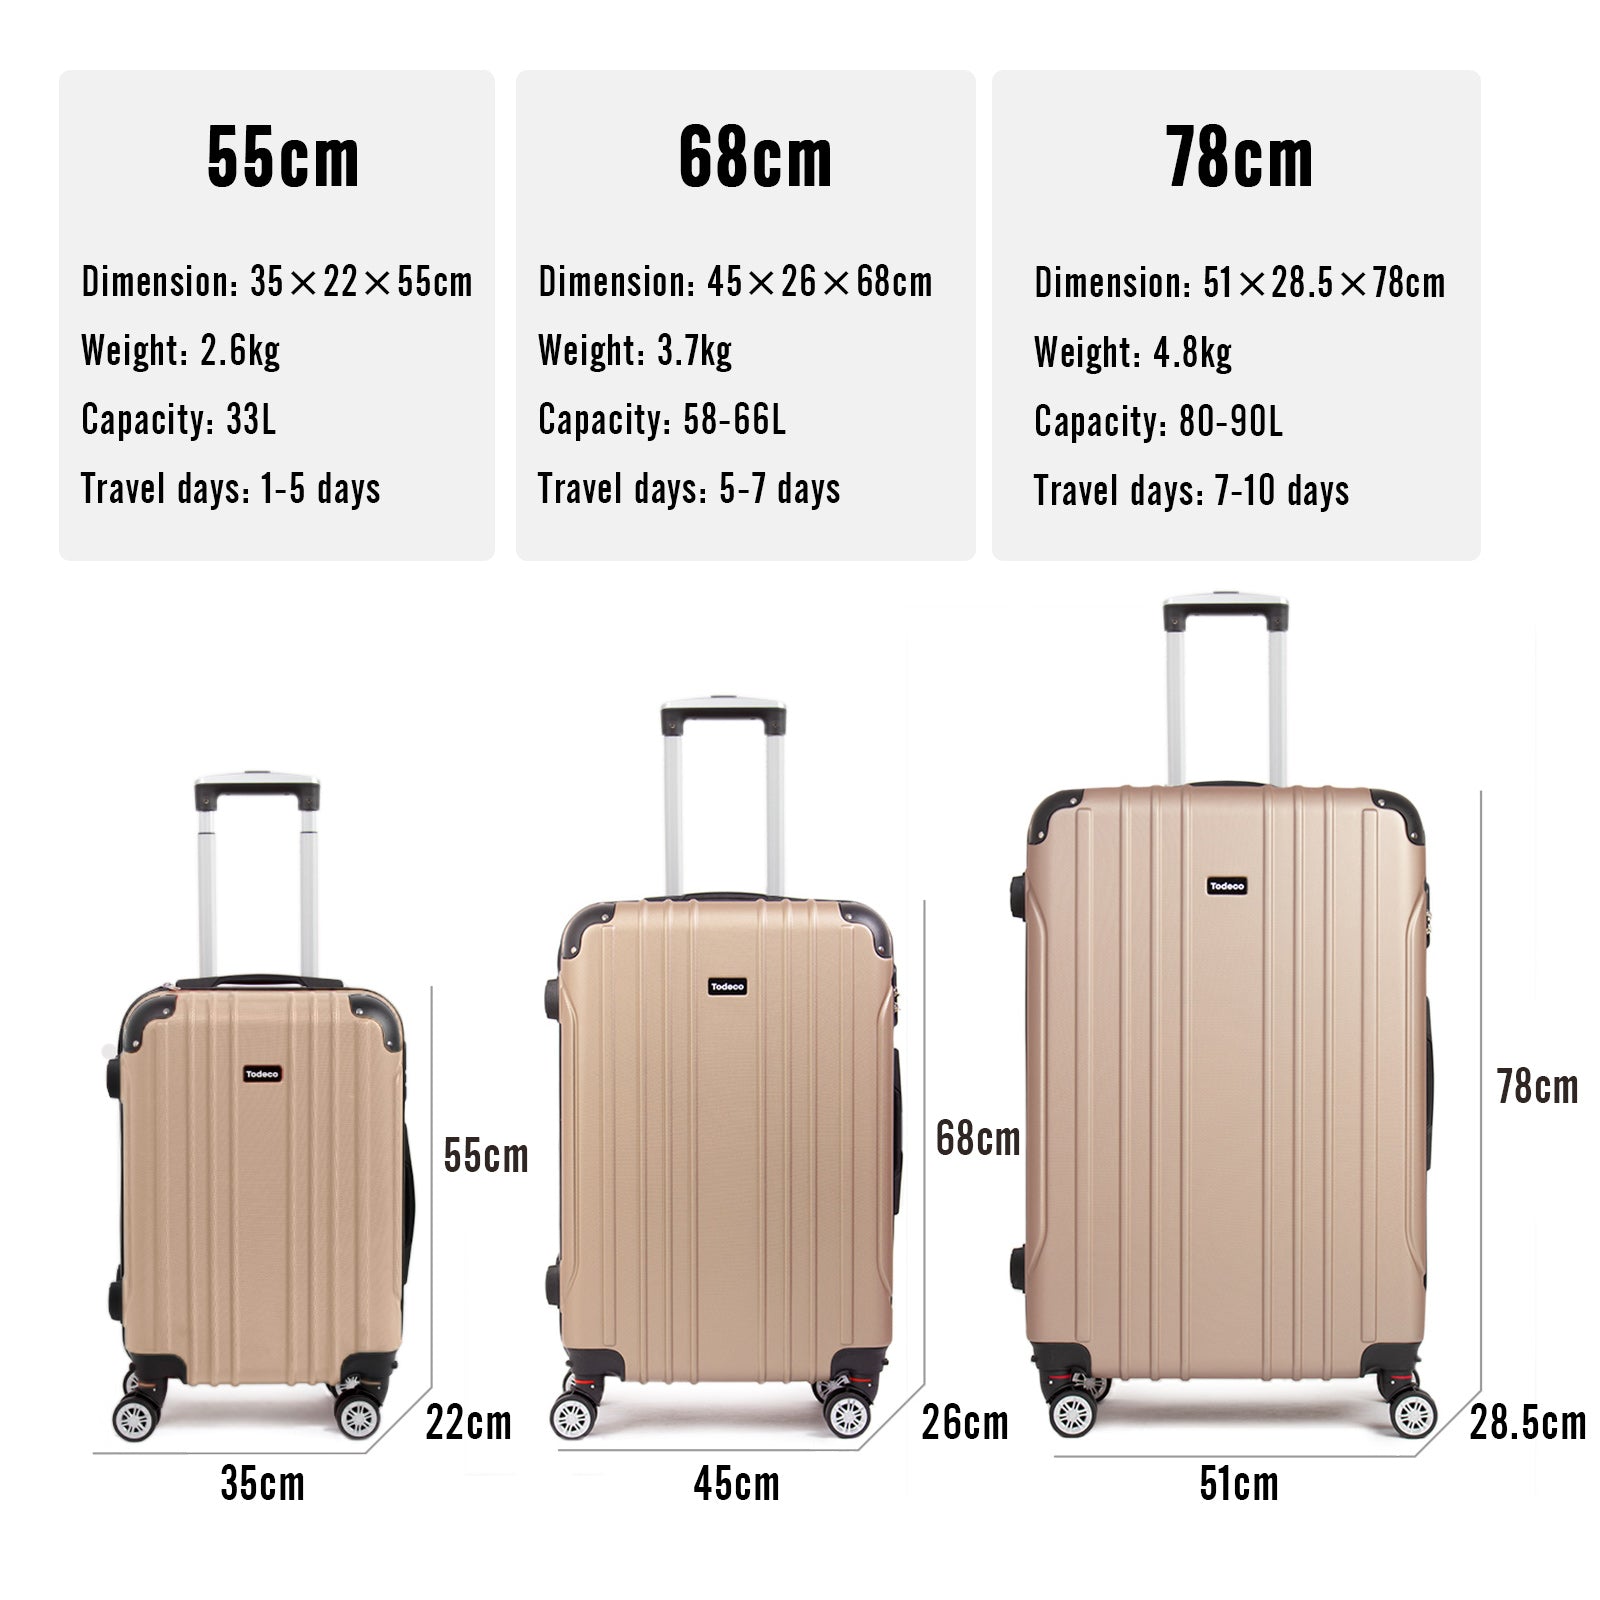 Todeco-Set-of-3-Rigid-Travel-Suitcases-55-68-78cm-Rigid-and-Lightweight-ABS-Travel-Suitcase-on-Wheels-Suitcases-4-Double-Wheels-Champagne-Set-of-3-Rigid-Travel-Suitcases-55-68-78cm-Champagne